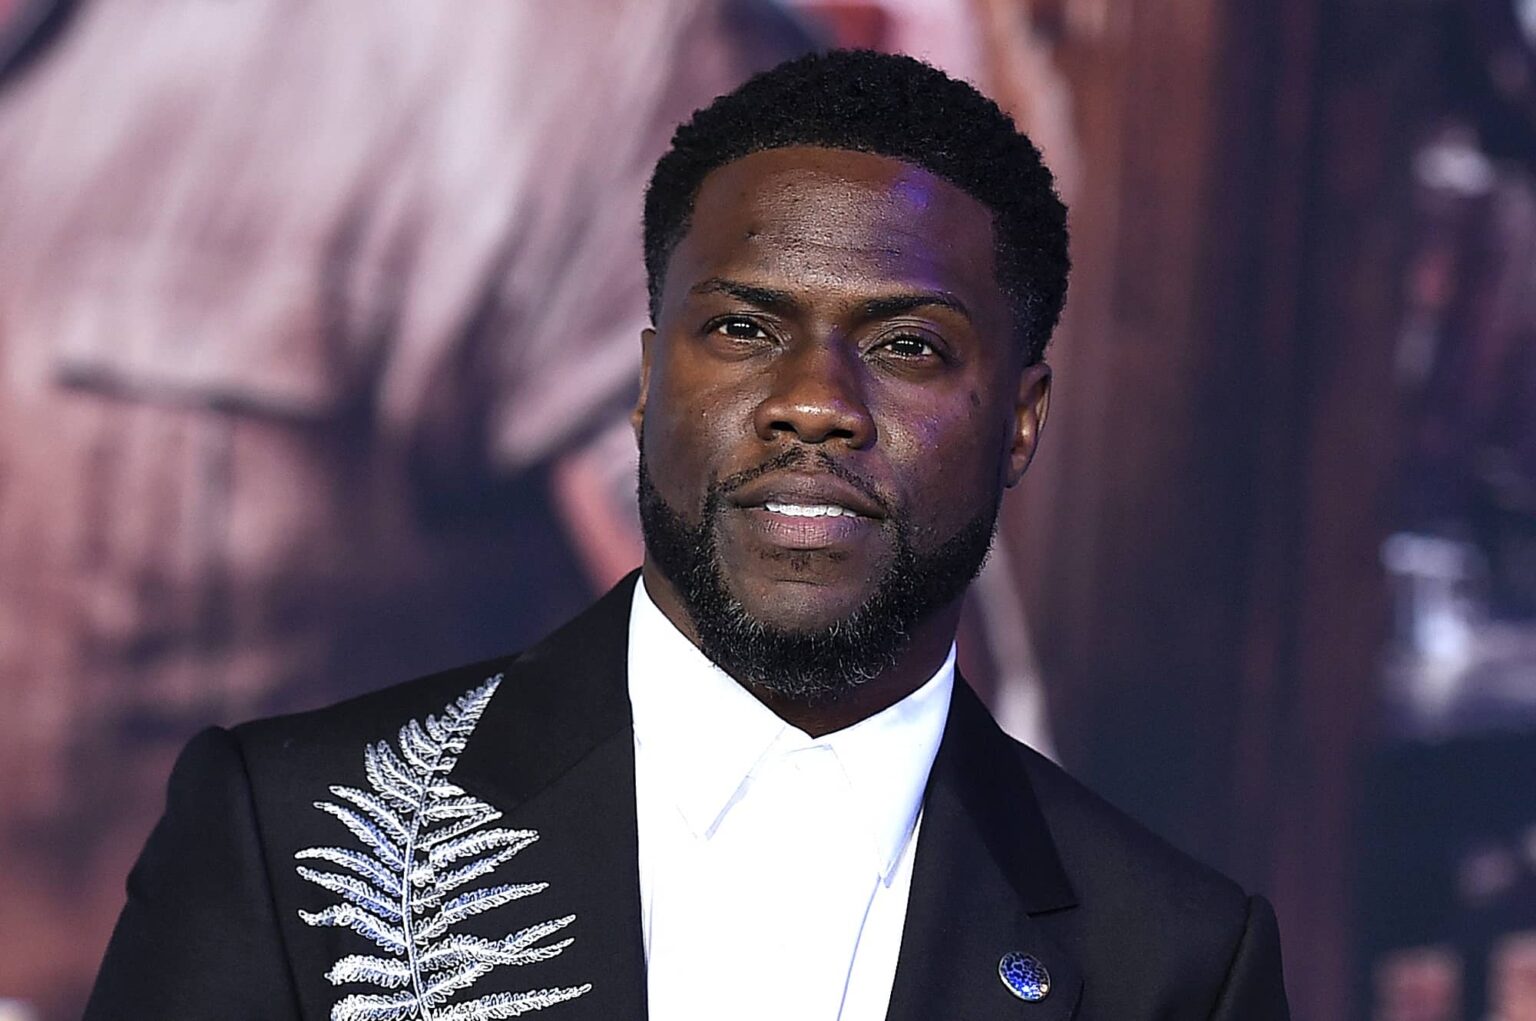 Kevin Hart & Twitter have had a contentious relationship over the past few years. Is it time for them to bury the hatchet? Find out what the actor thinks!